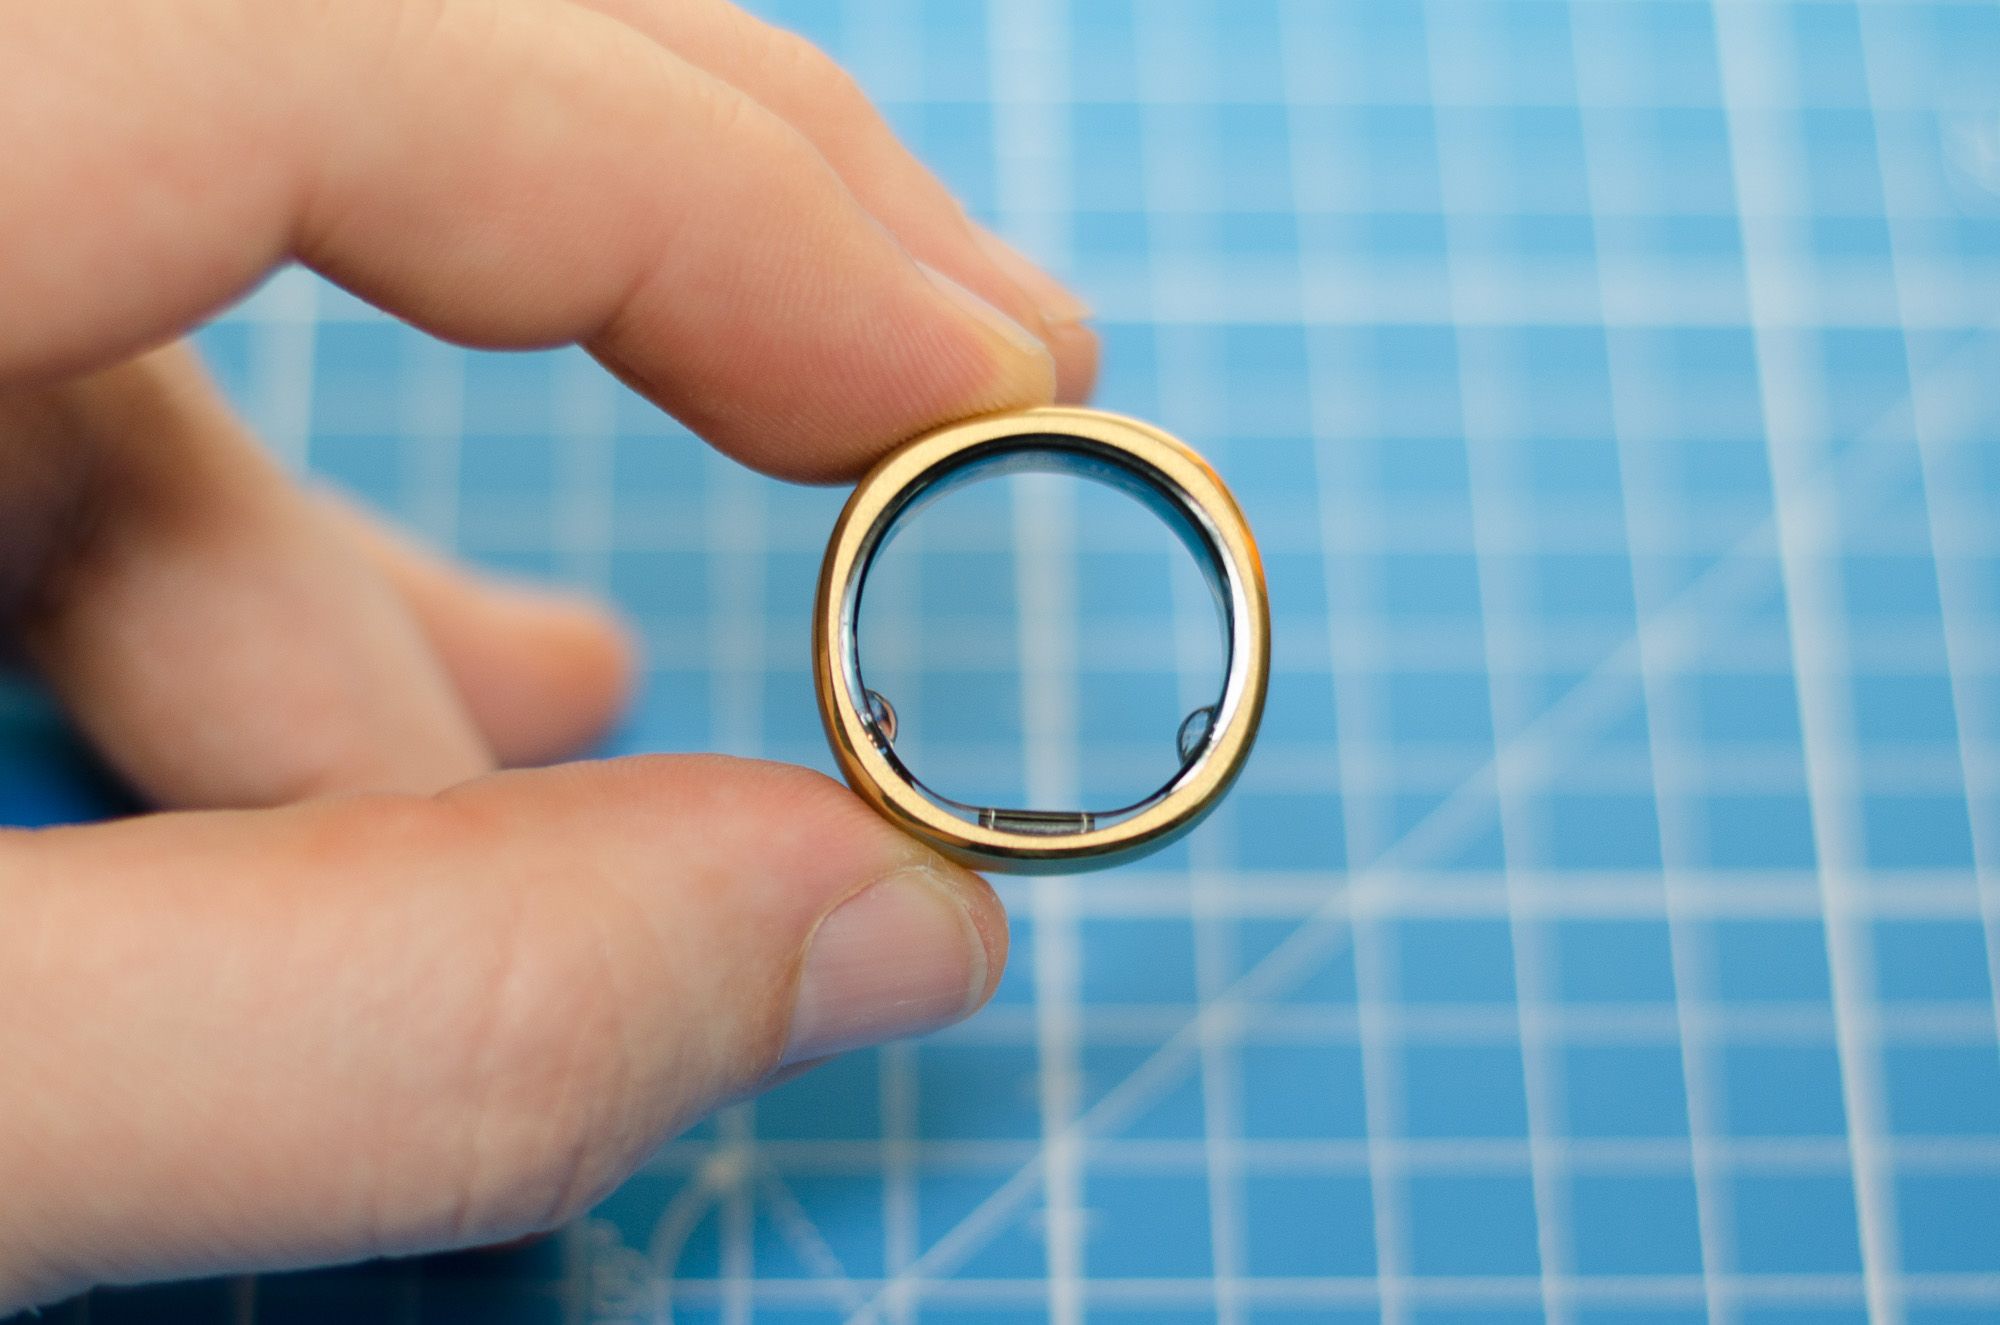 RingConn smart ring review: Four months later and still impressed